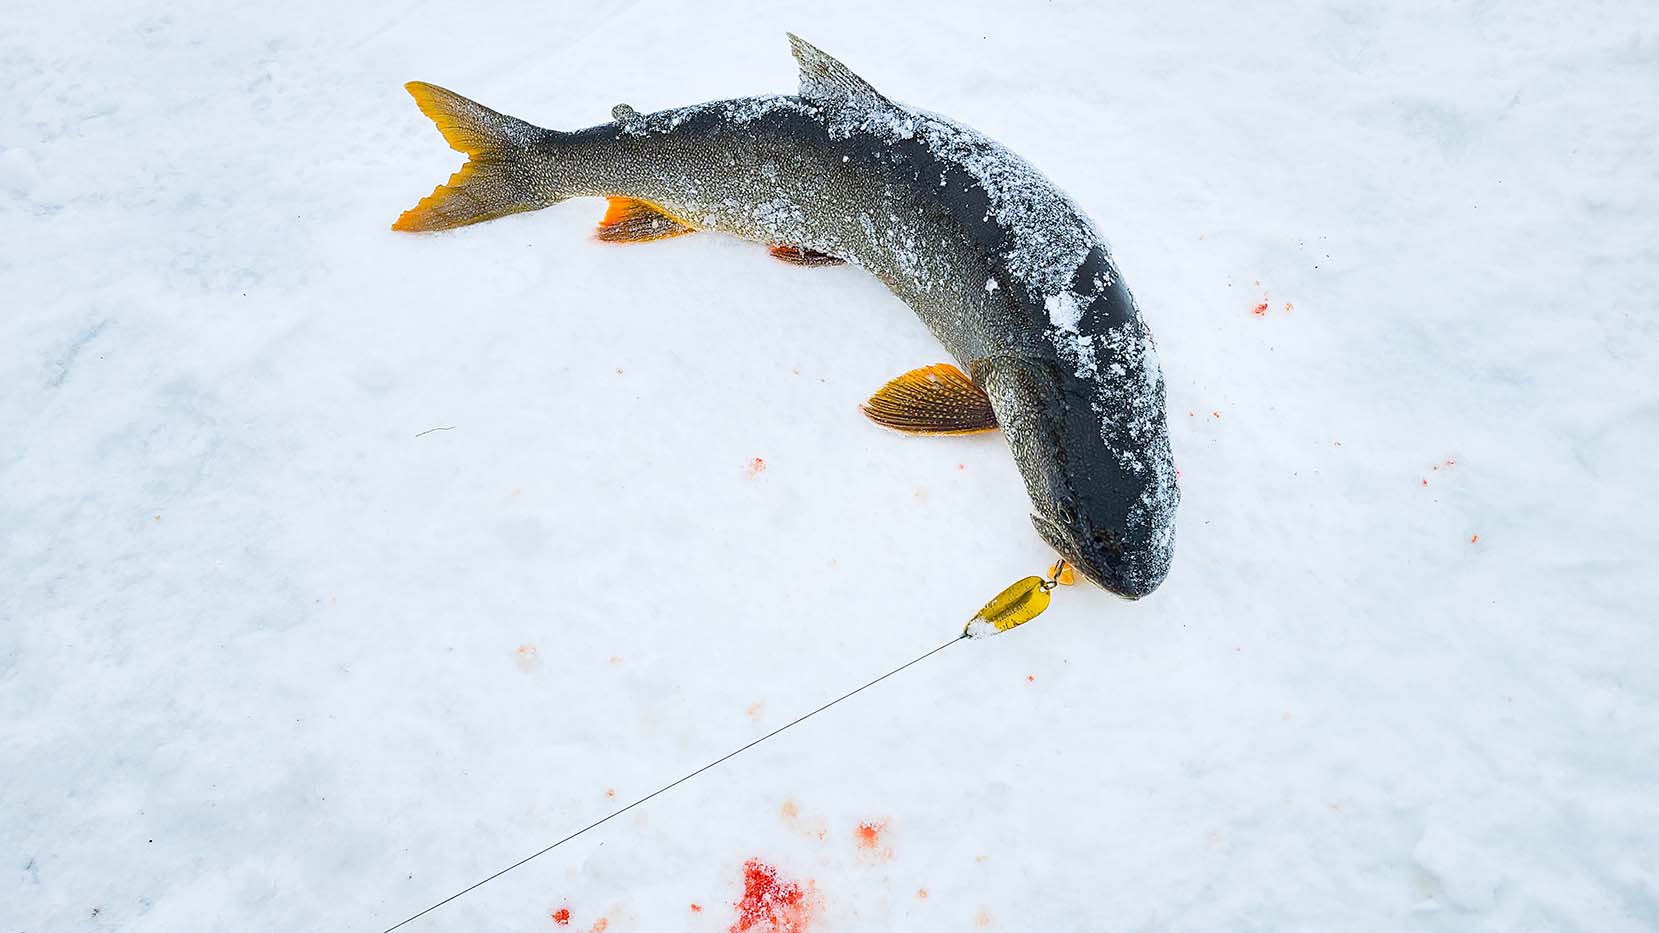 A Trophy Lake Trout Through the Ice - On The Water